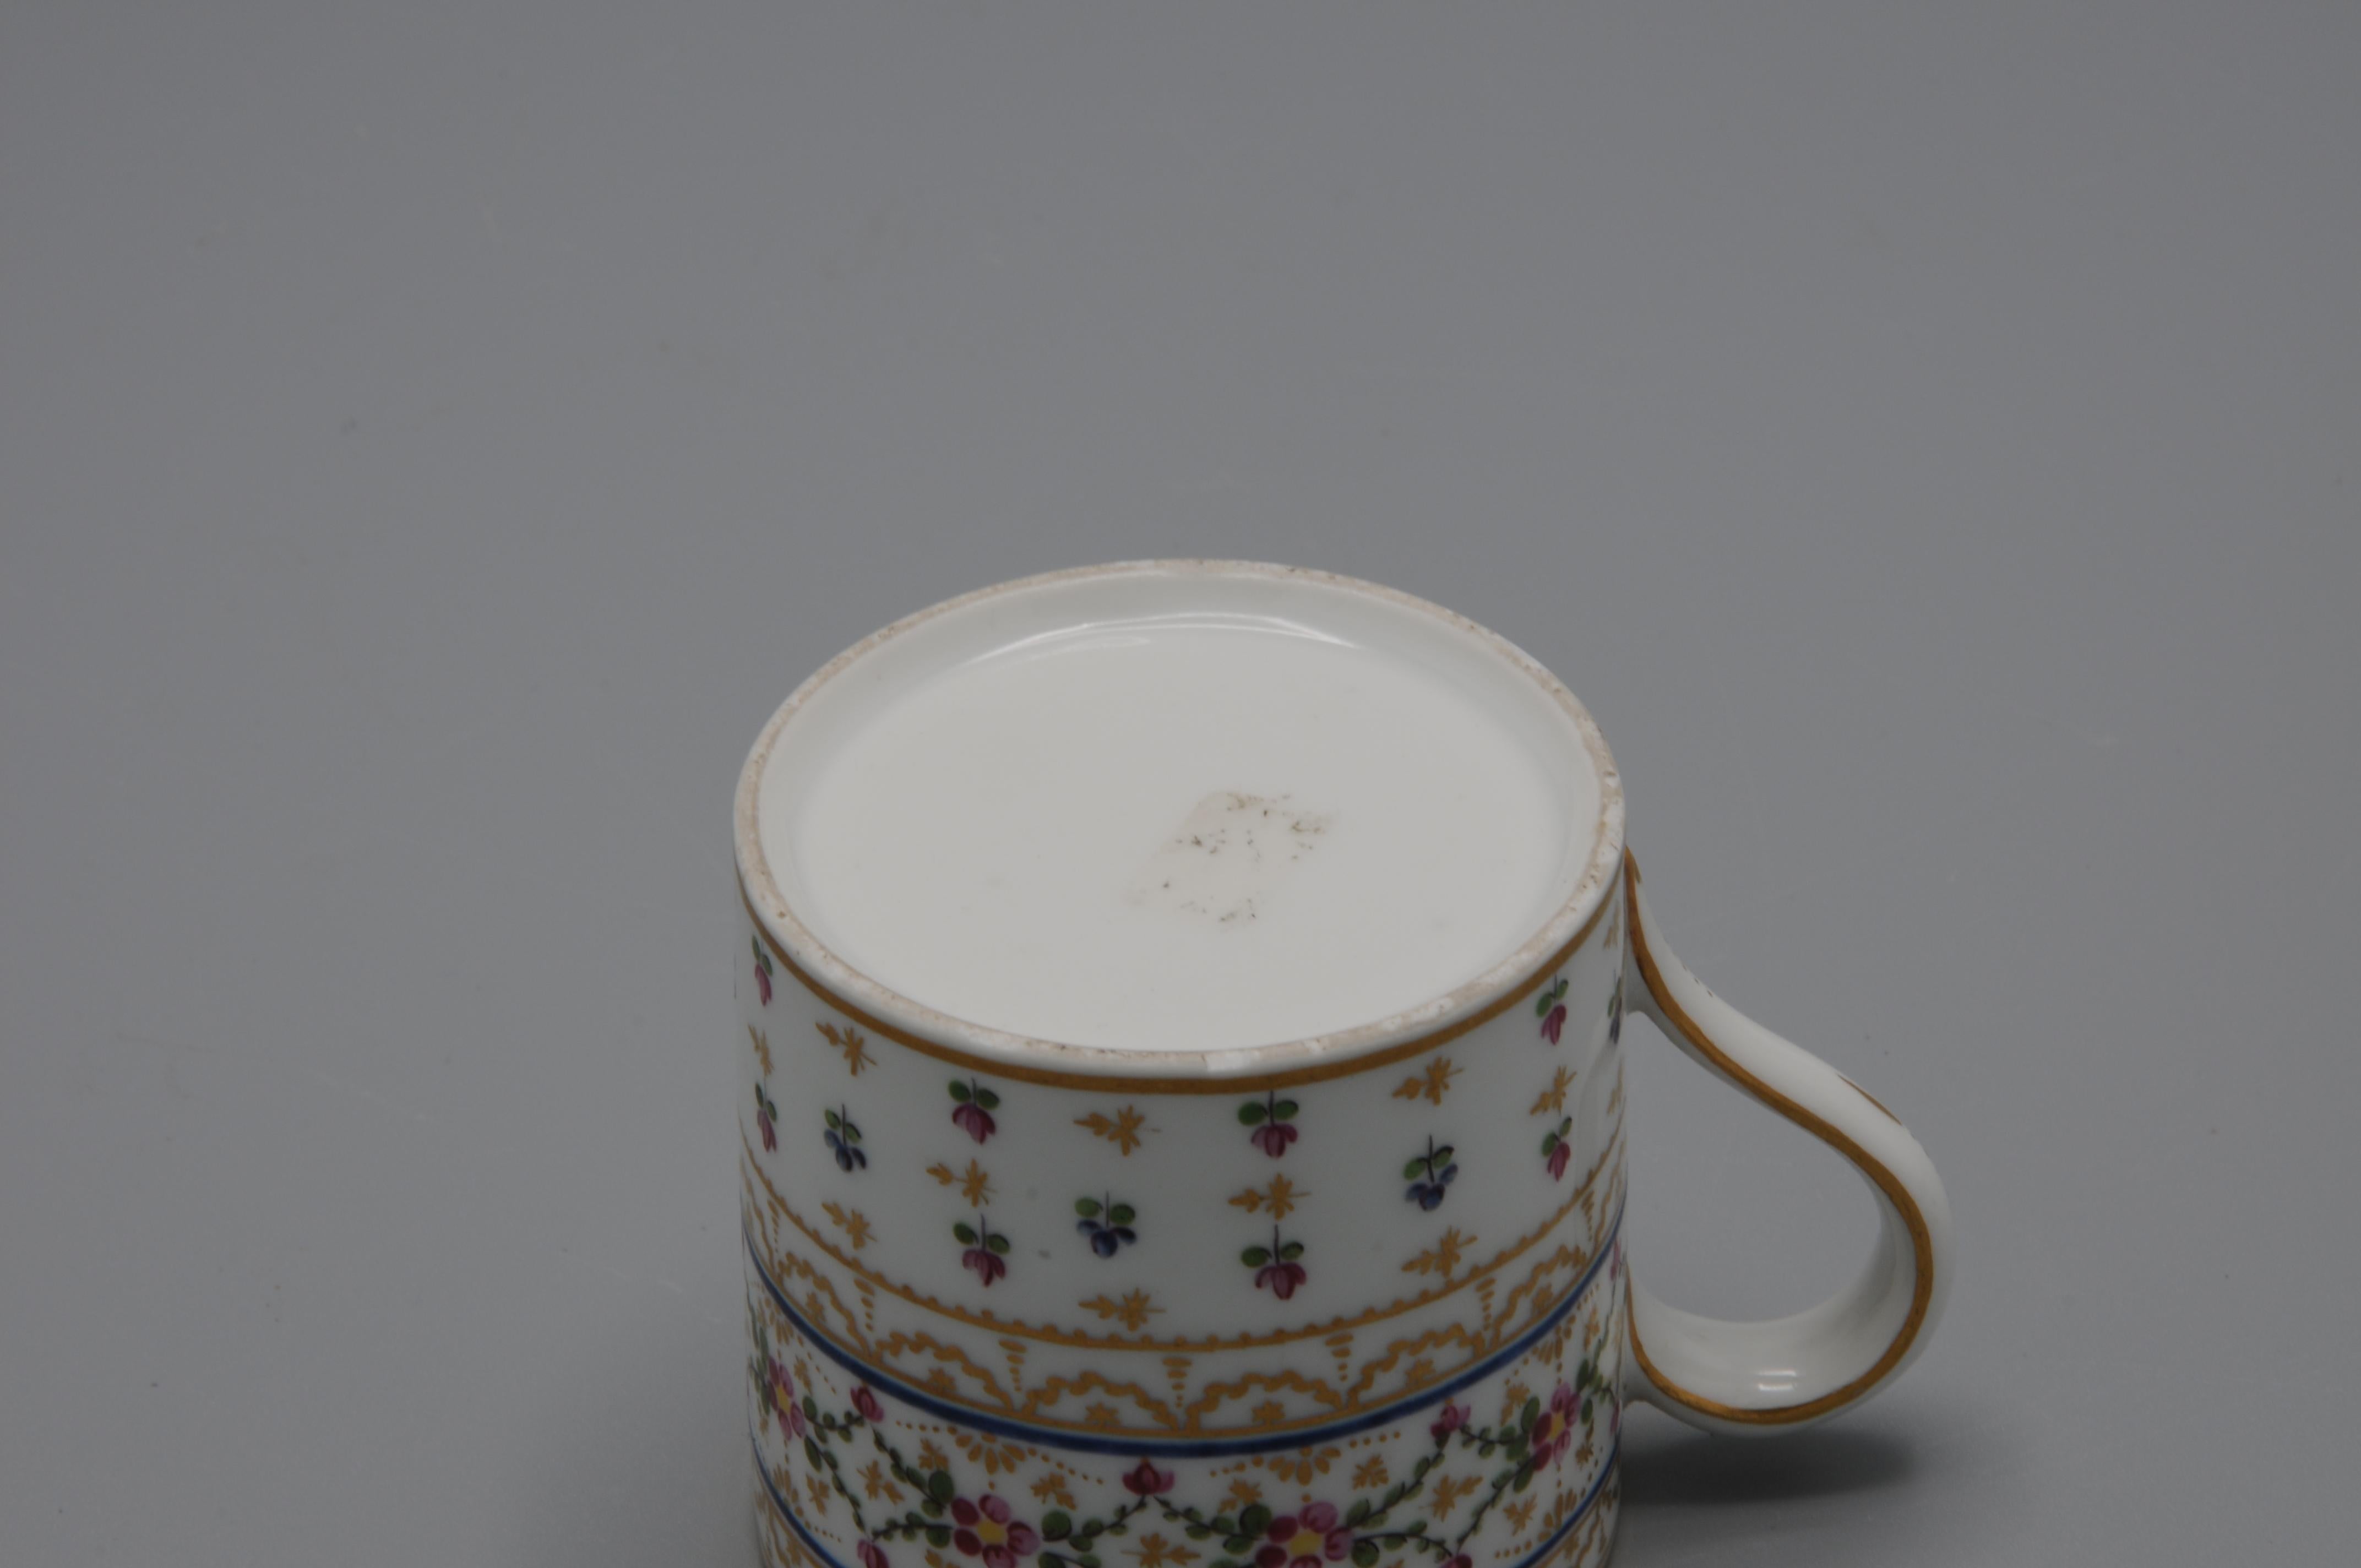 André Leboeuf, Manufacture à la Reine' - Cup and saucer 'Litron', late 18th For Sale 3